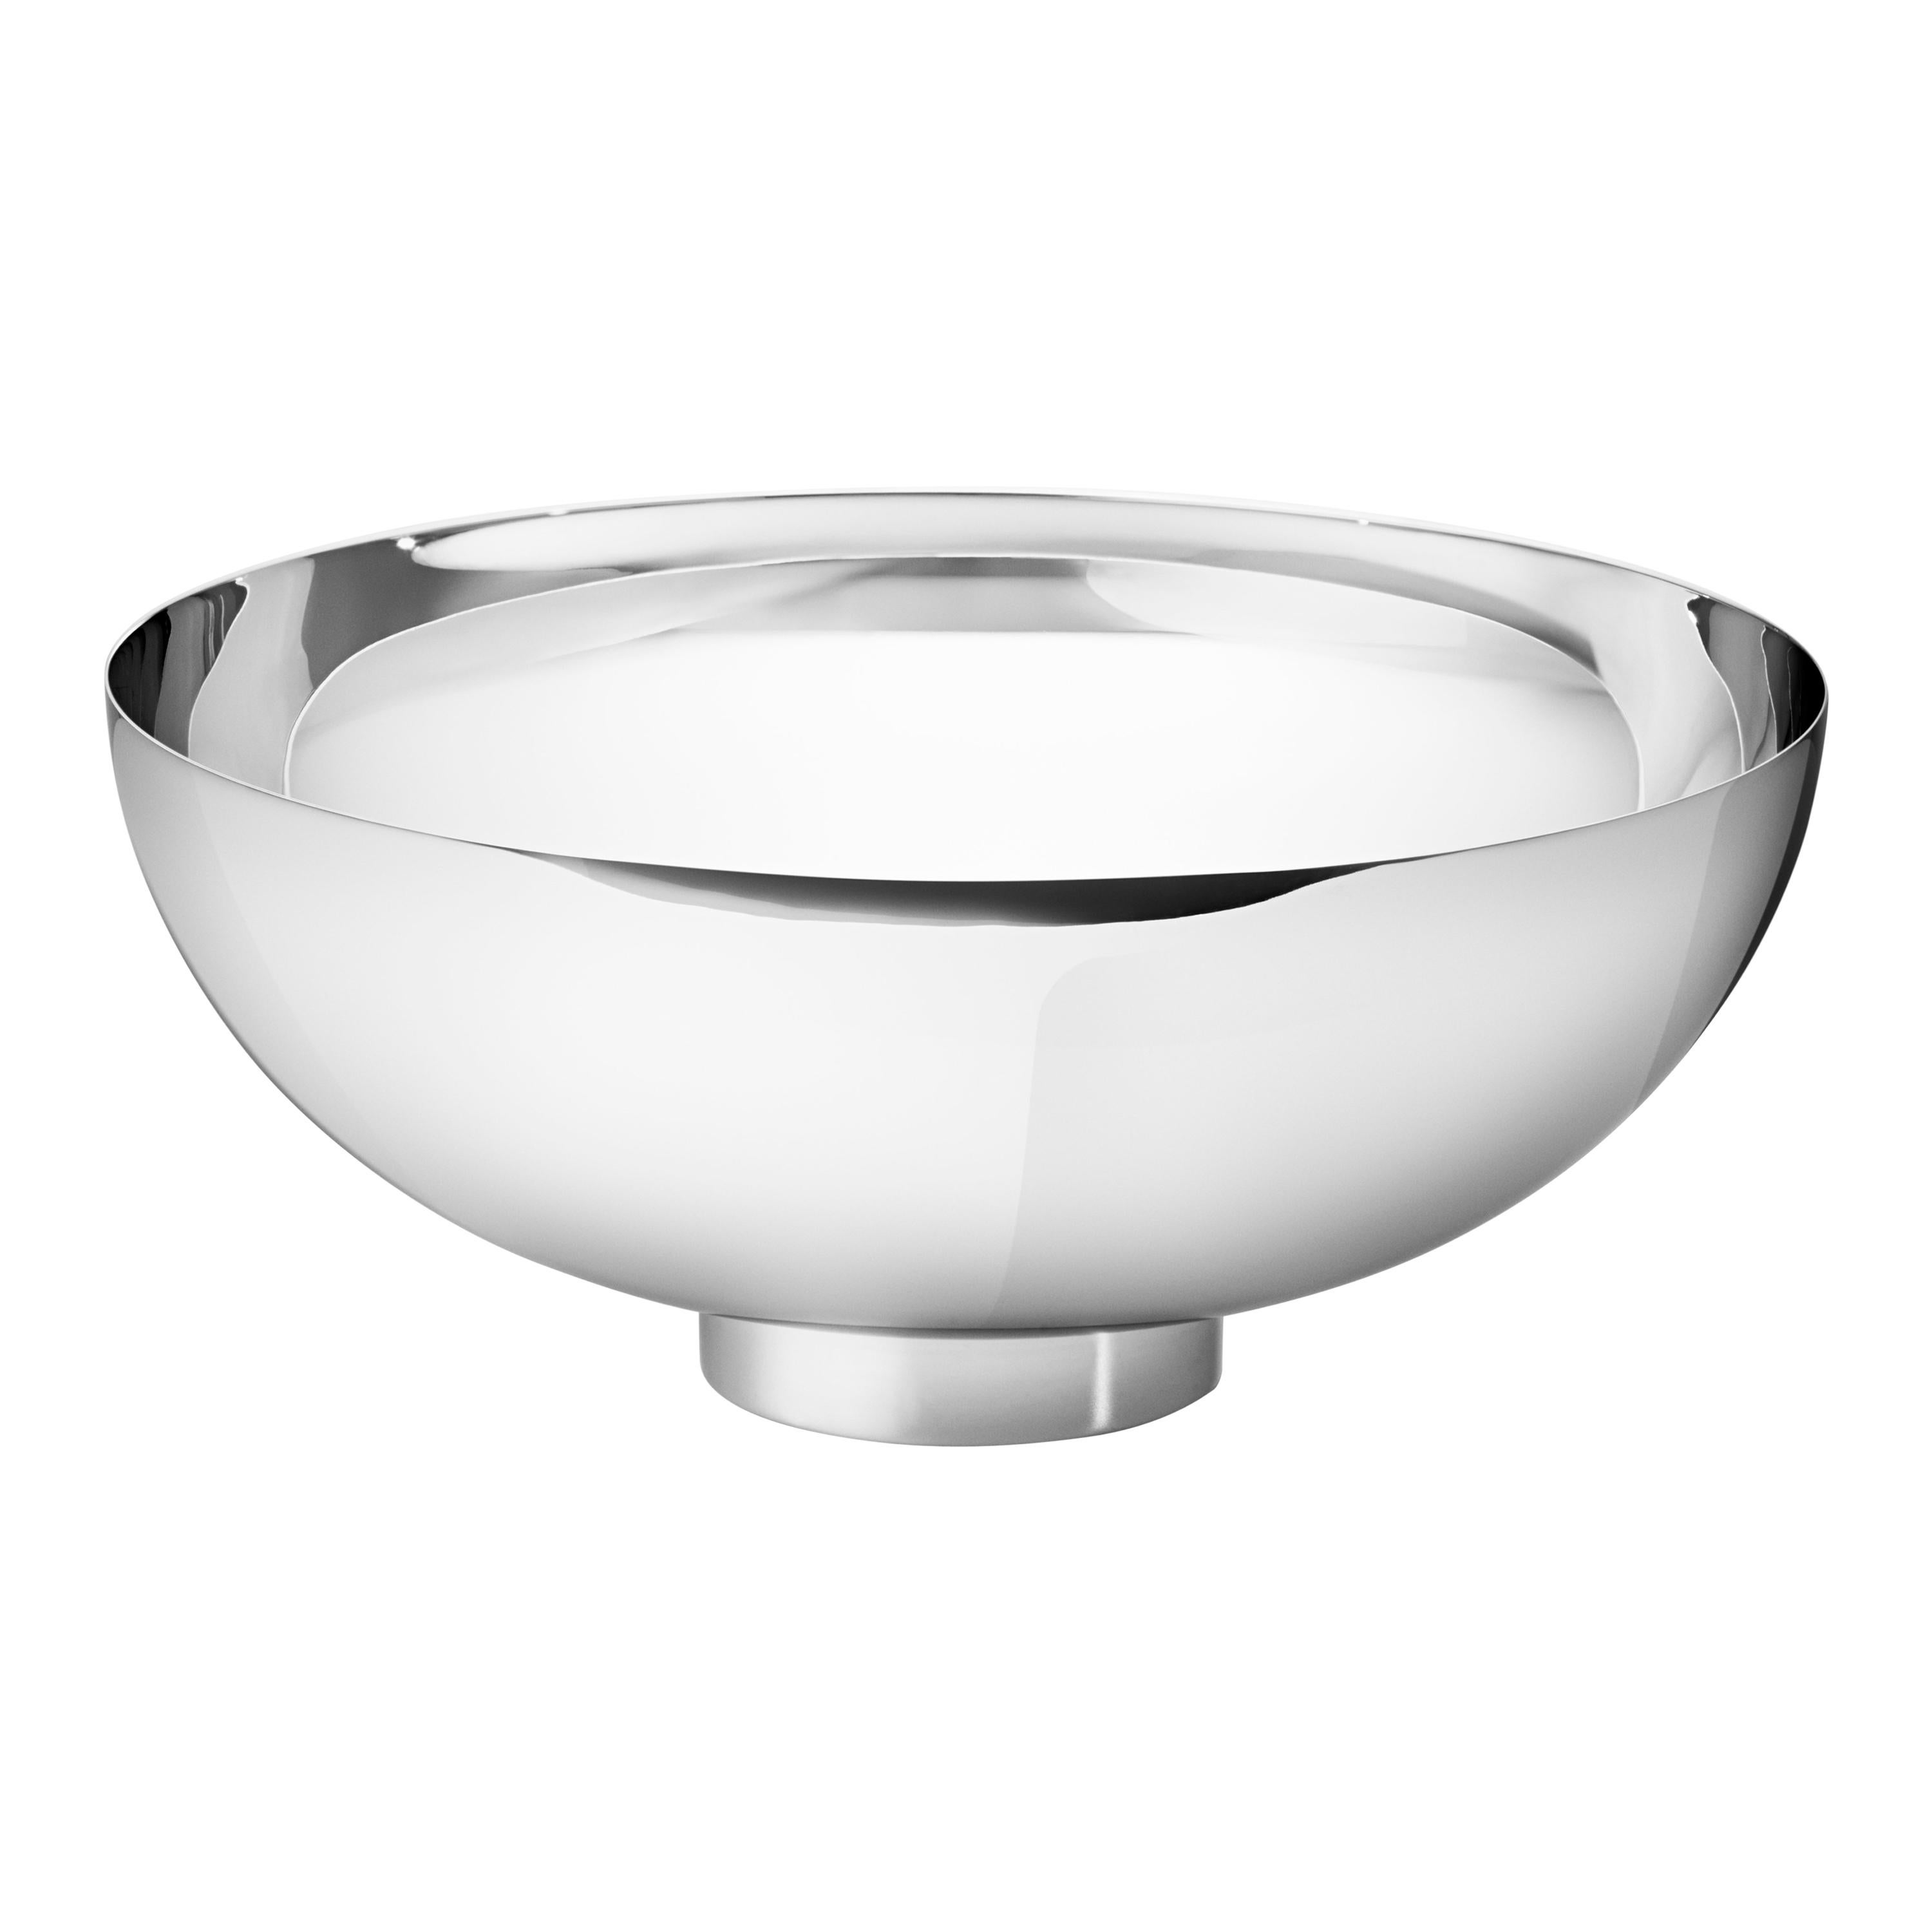 Georg Jensen Ilse Large Bowl in Stainless Steel Mirror Finish by Ilse Crawford For Sale